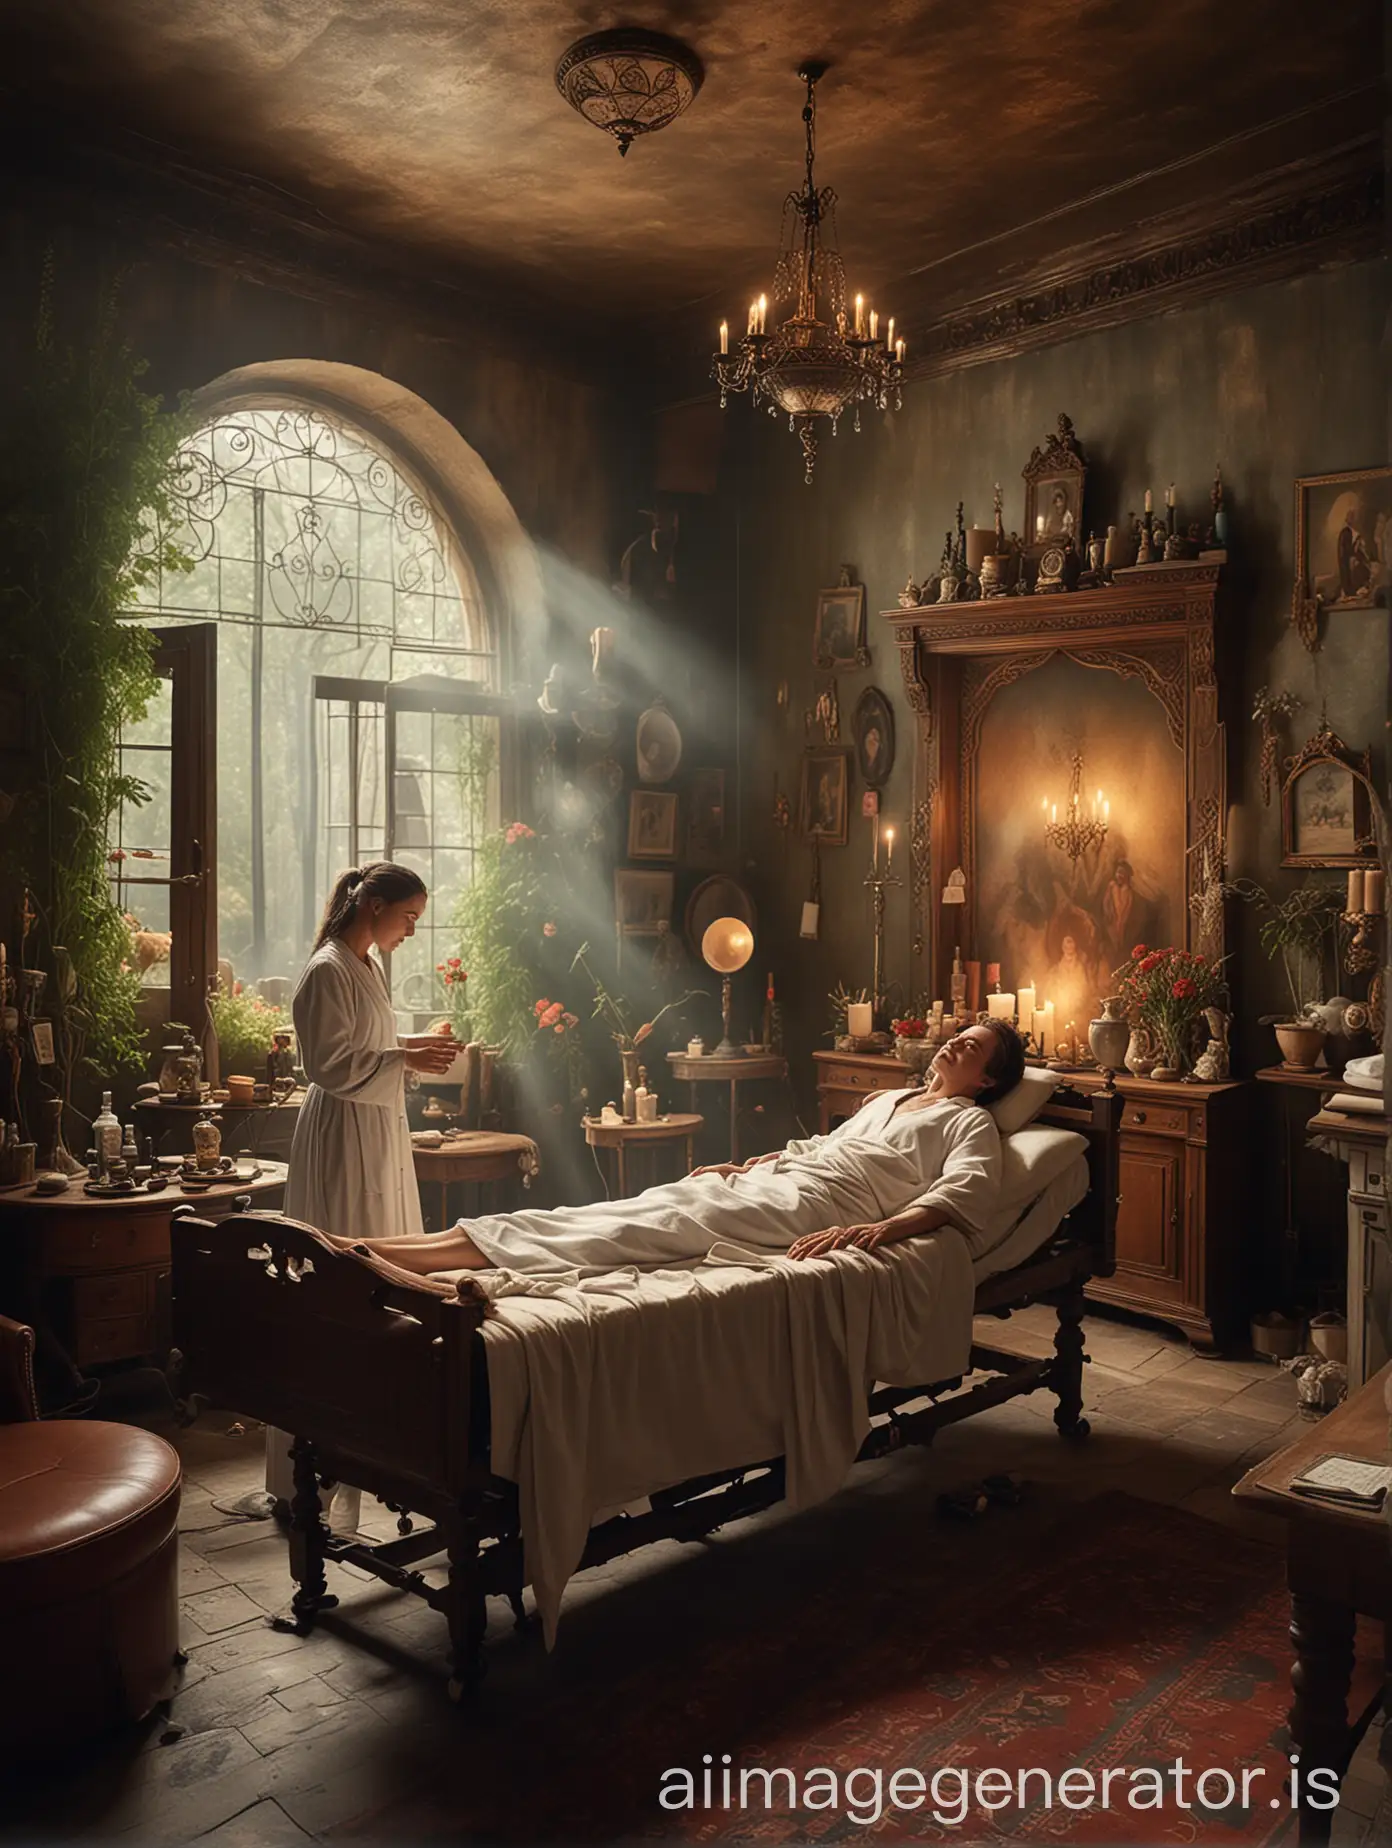 A healer treating patients, in a marvelous room full of patients of the fantasy world